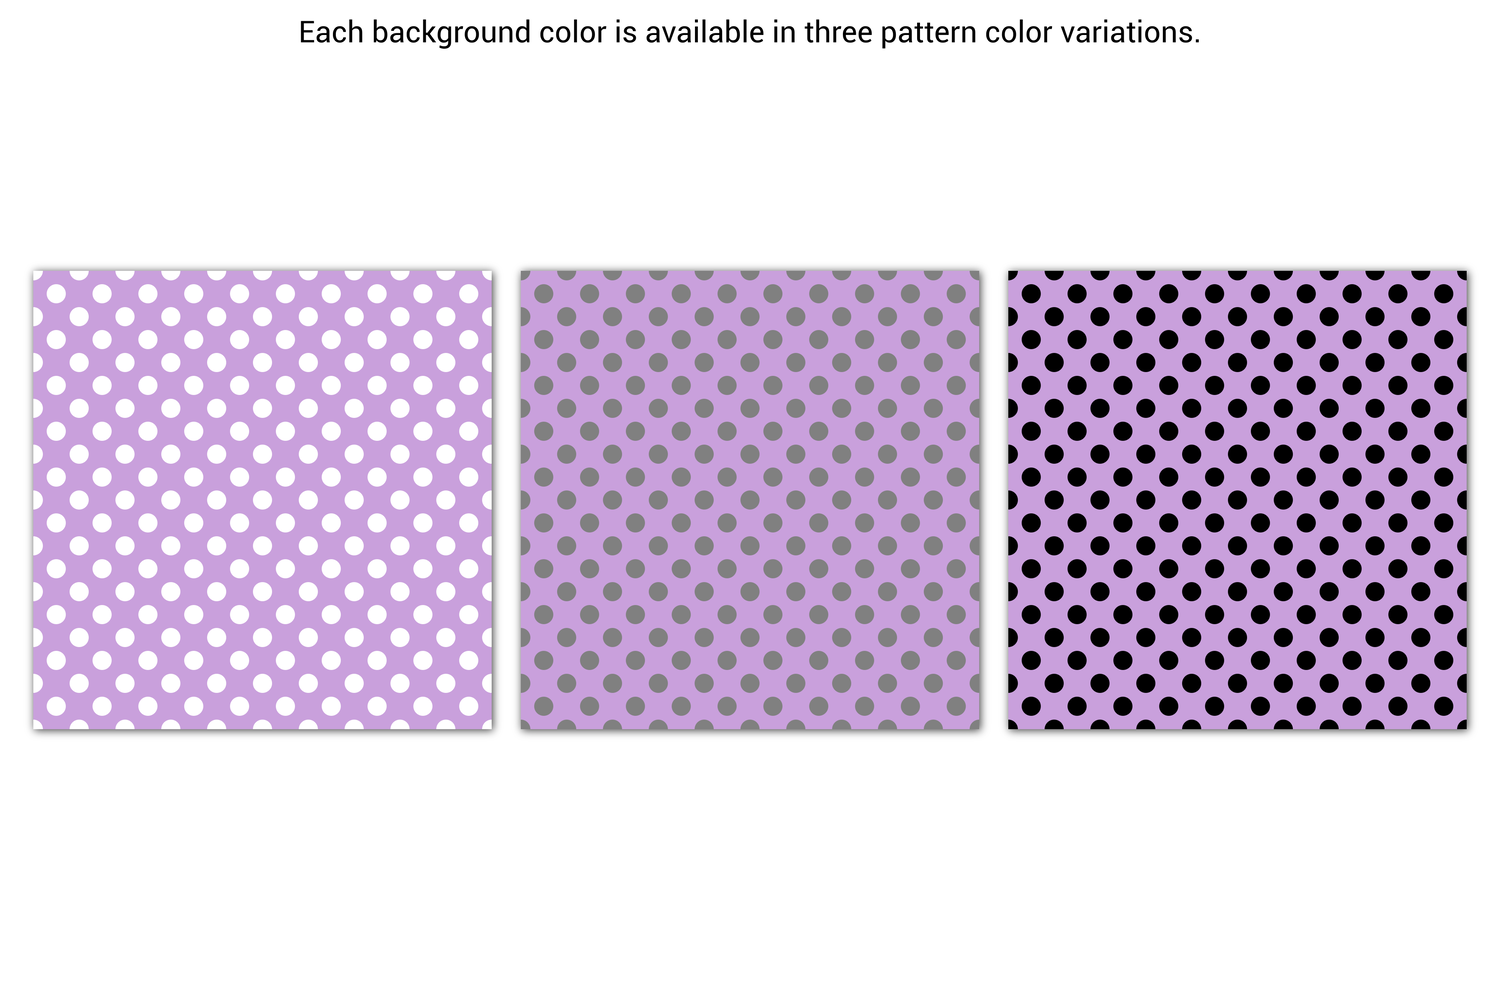 Seamless Very Large Polka Dot Paper-250 Colors with Pattern By